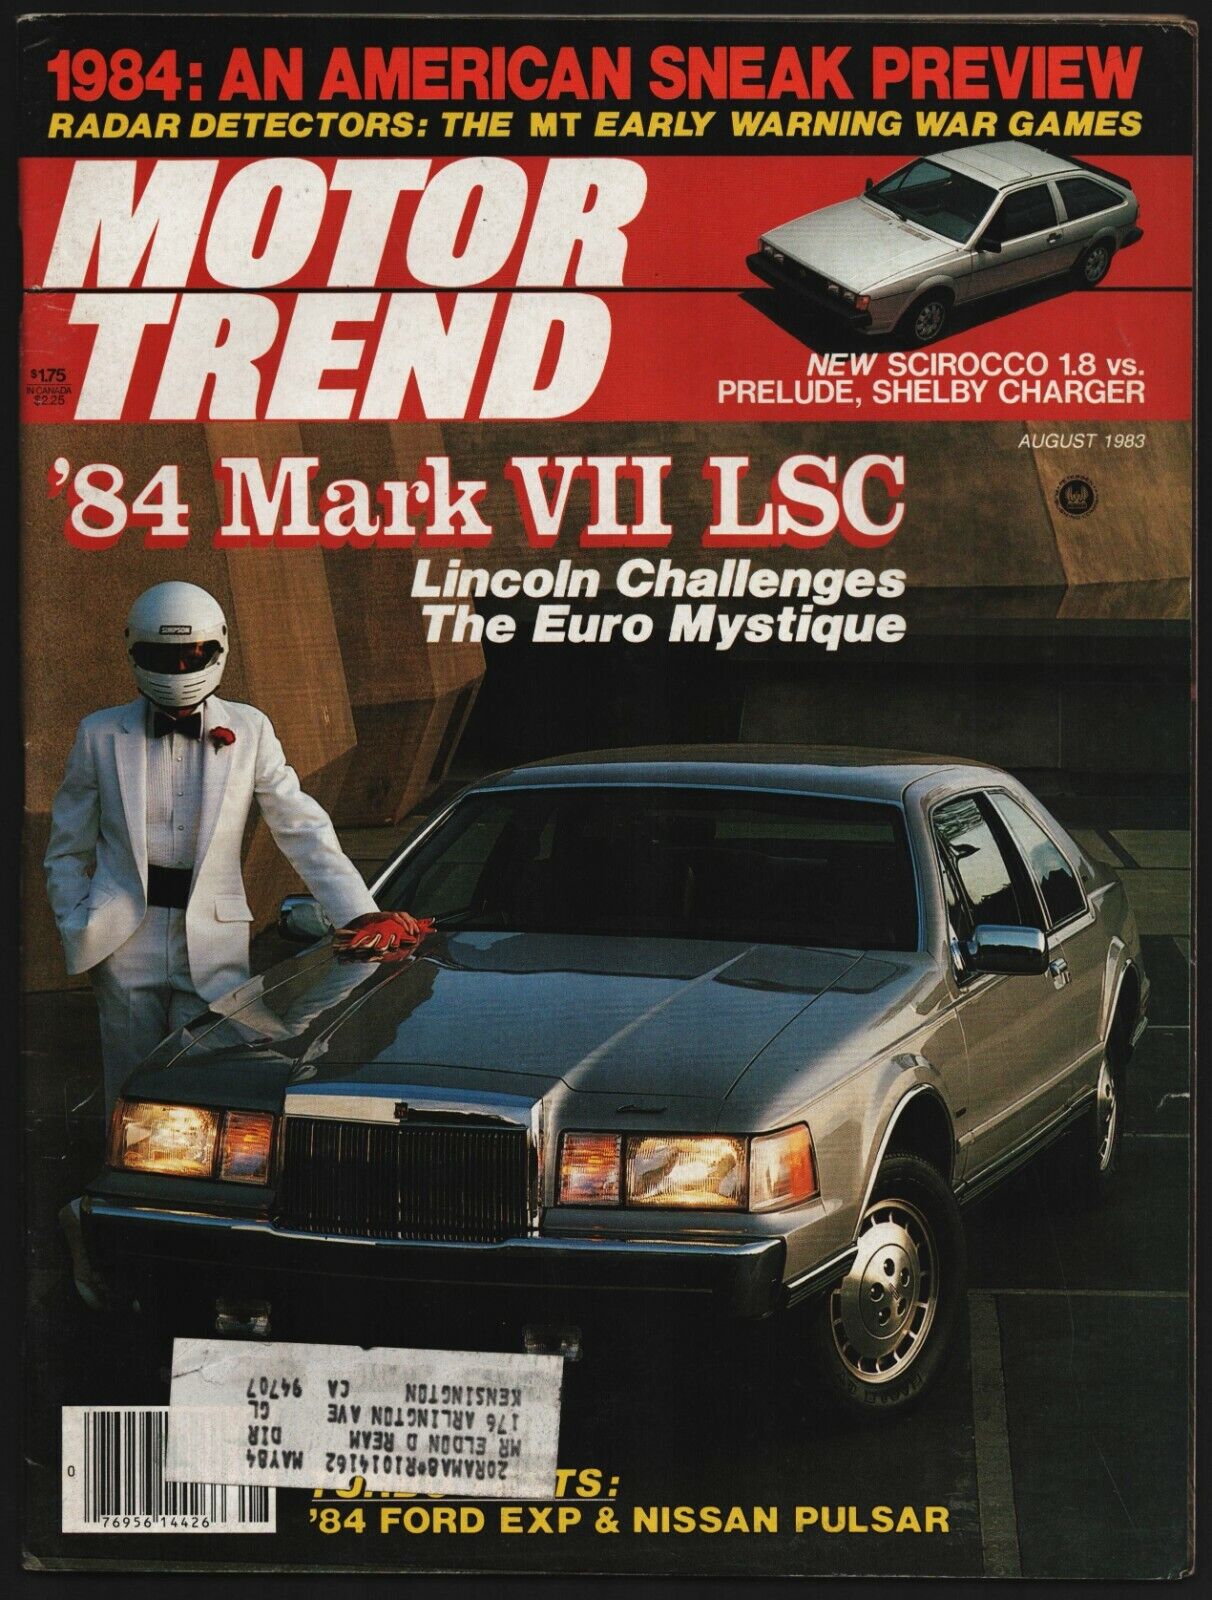 AUGUST 1983 MOTOR TREND MAGAZINE LINCOLN MARK VII LSC, SHELBY CHARGER, SCIROCCO